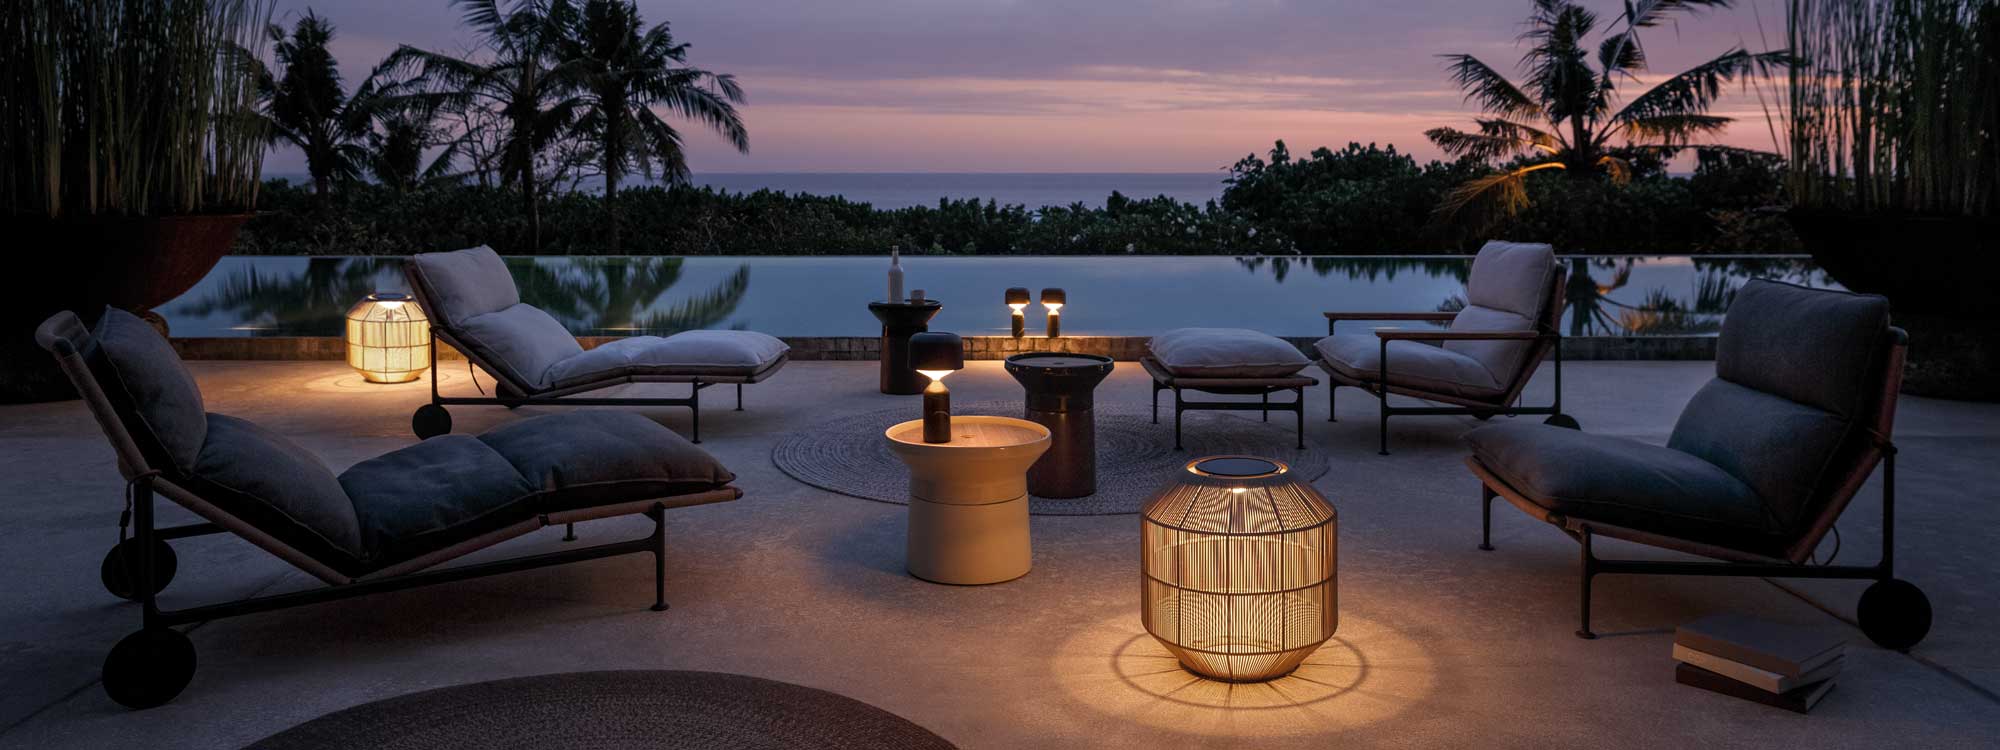 Nighttime image of Gloster Zenhit outdoor lounge furniture, illuminated Basket lanterns and Coso side tables alongside peaceful horizon swimming pool